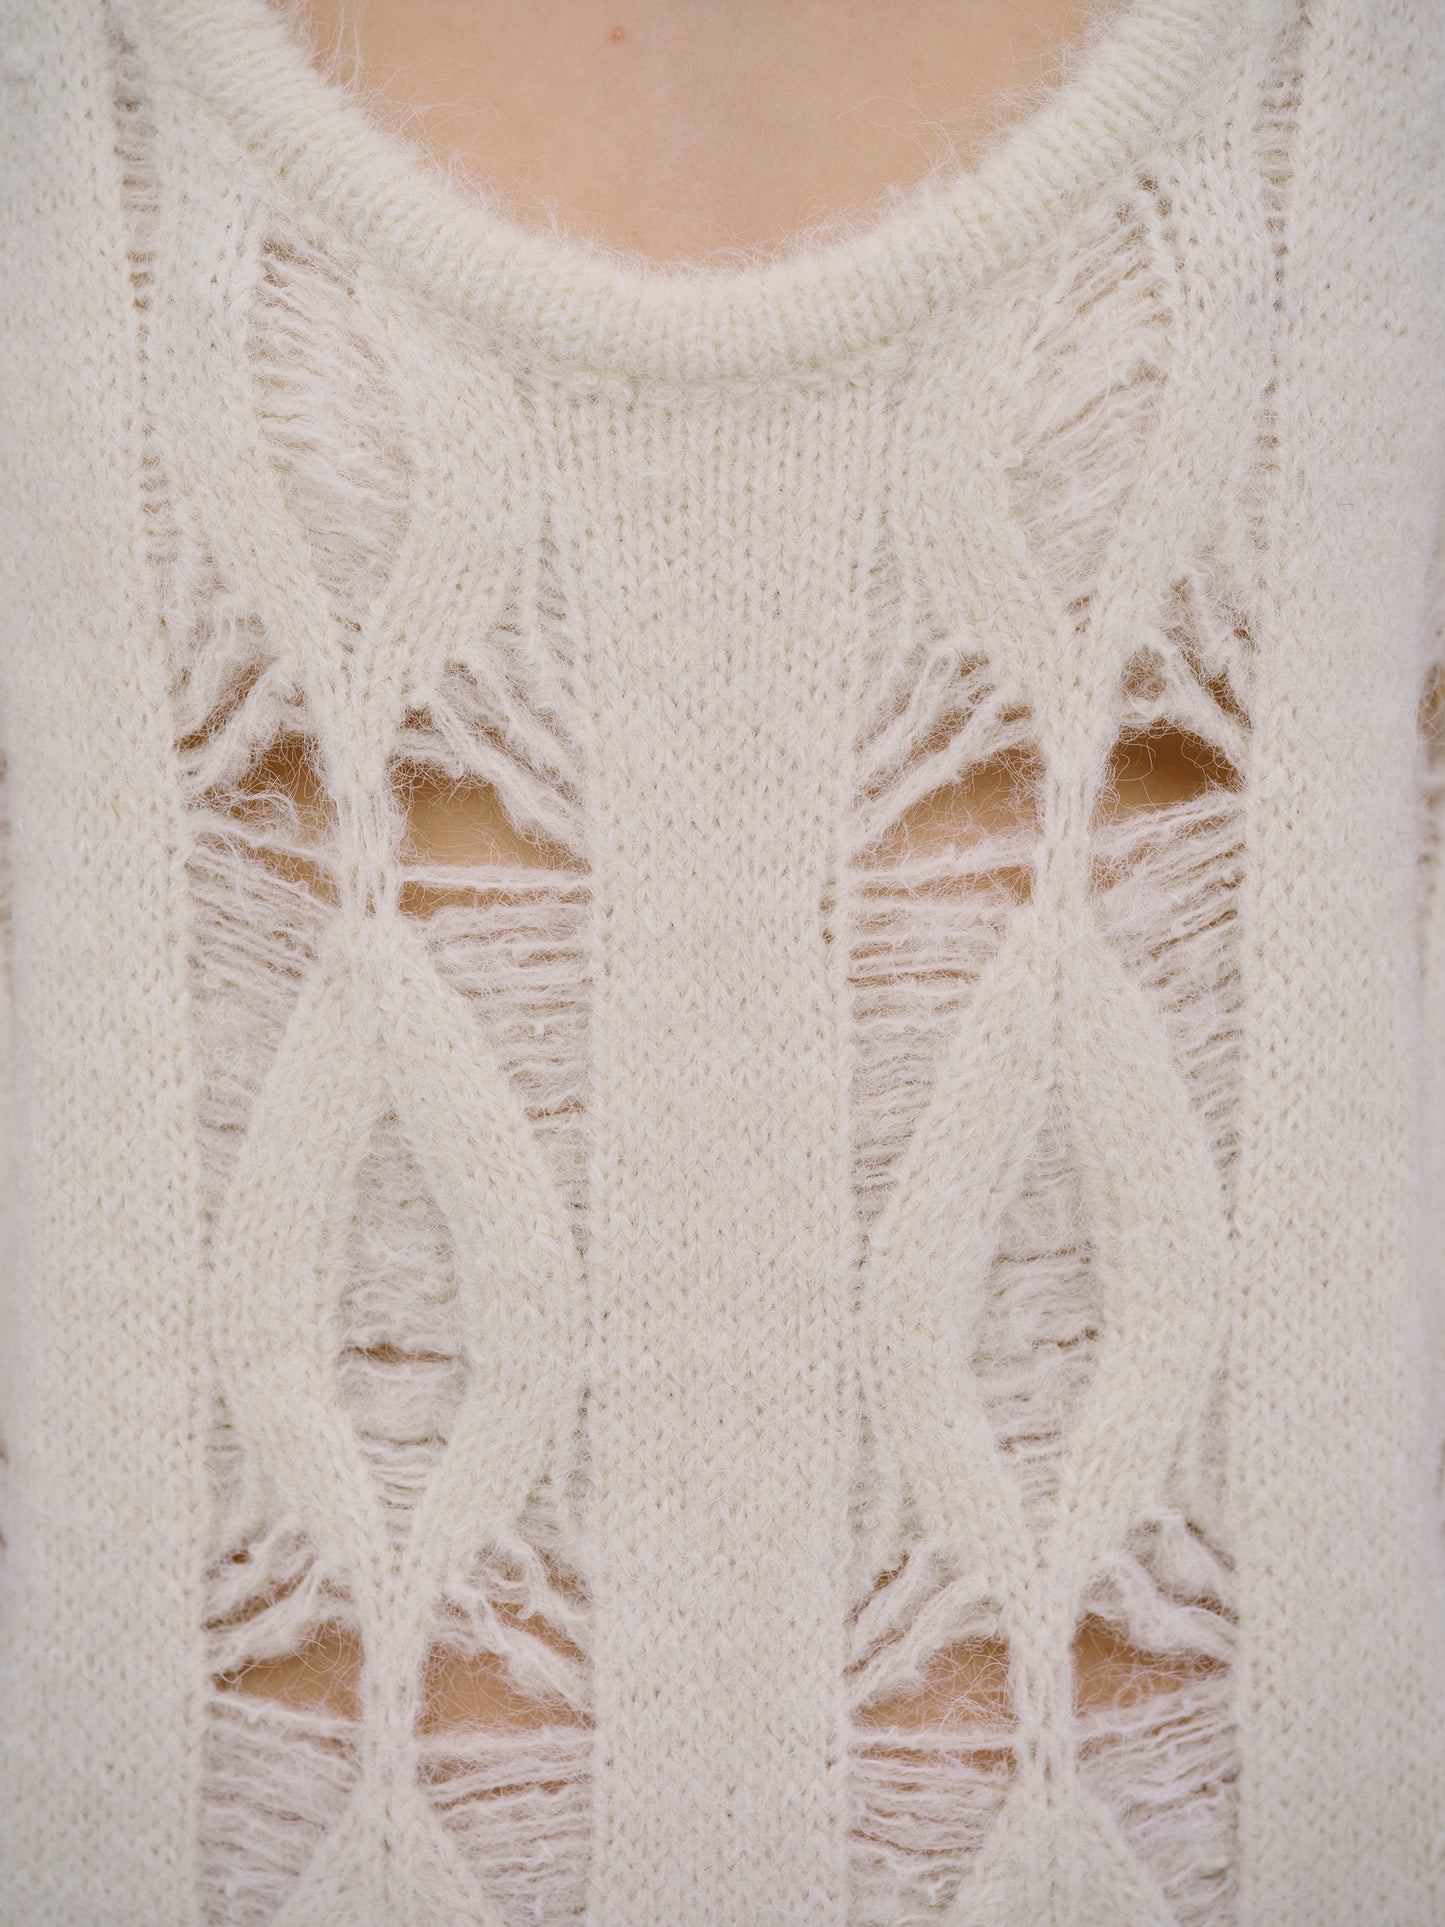 Isaline Cable Knitted Dress, Papyrus